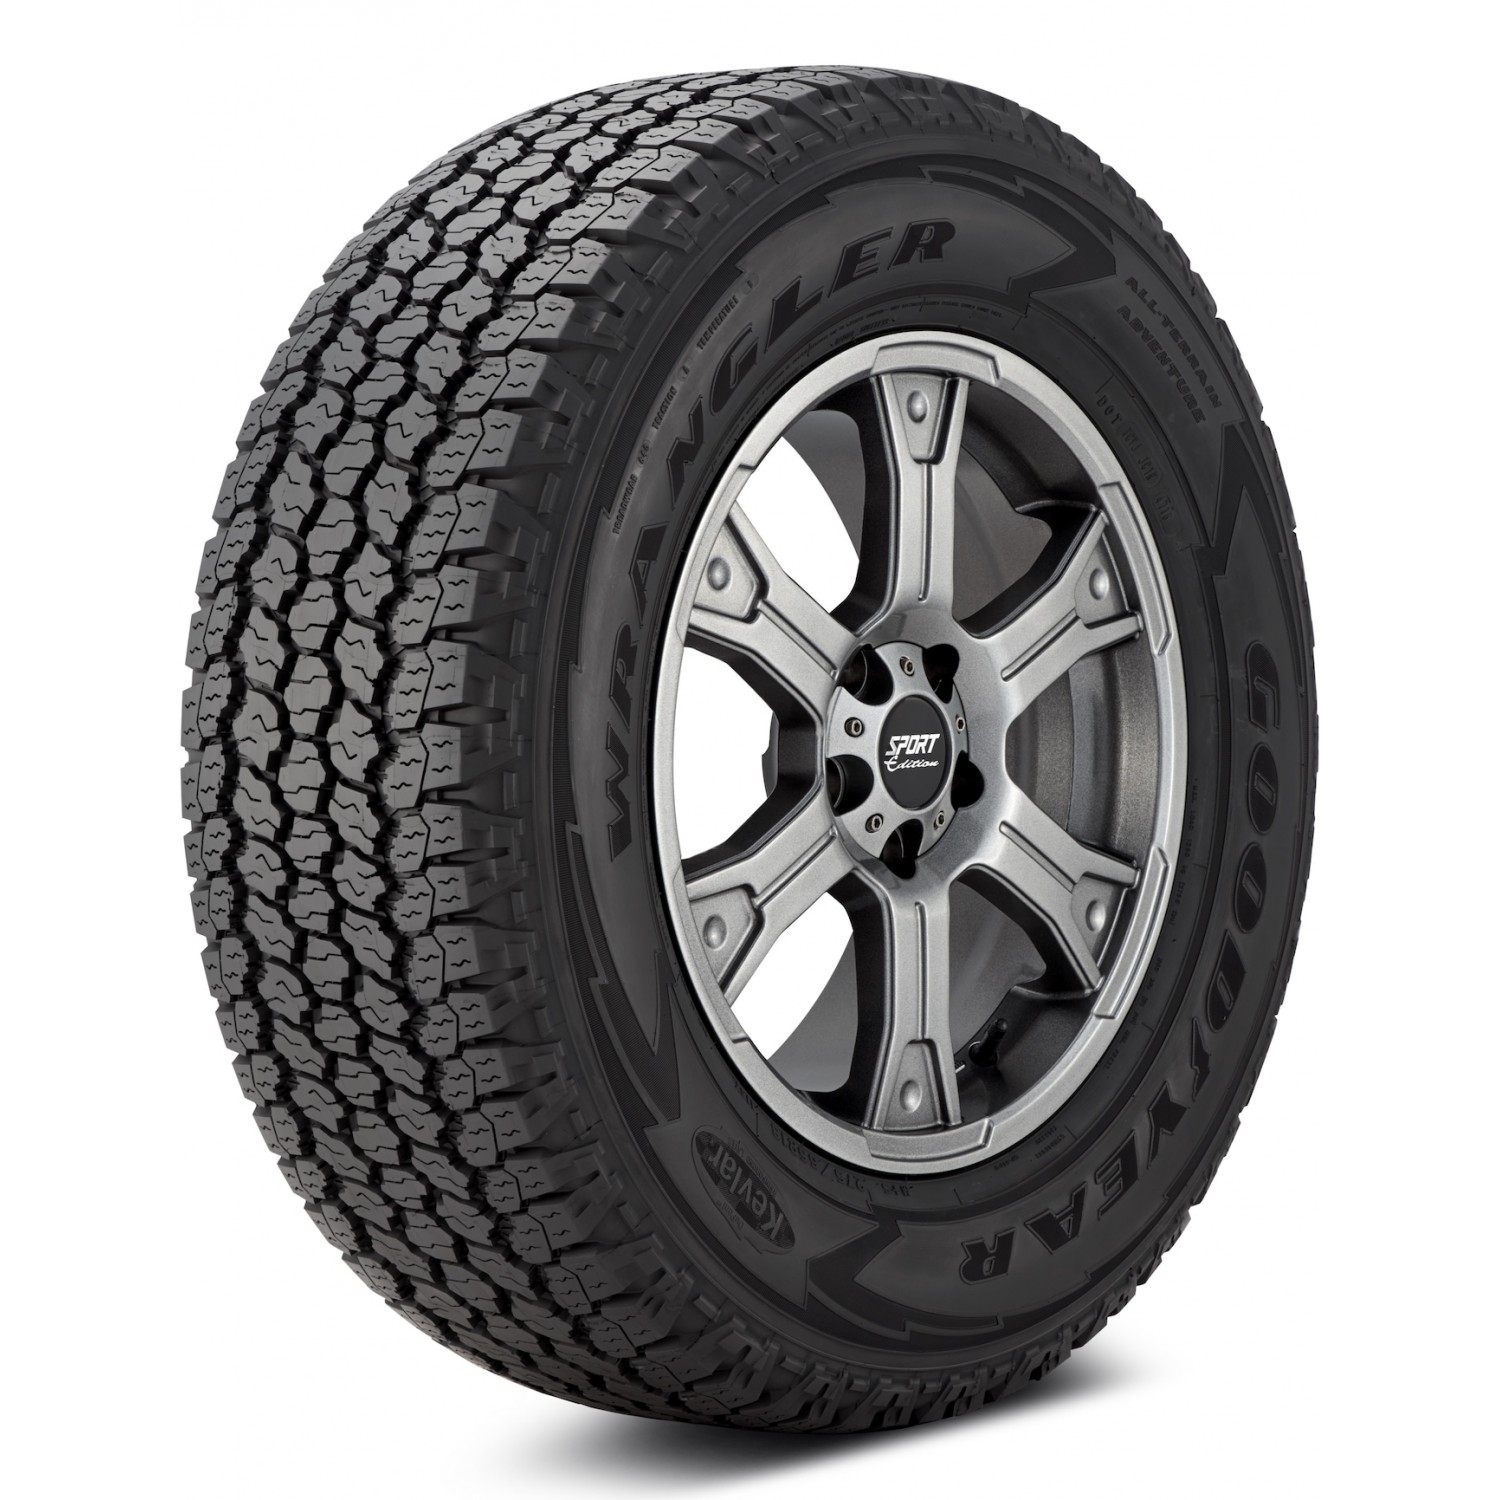 Goodyear Wrangler AT Adventure With Kevlar Black Sidewall Tire (275/65R18  116T) vzn121222